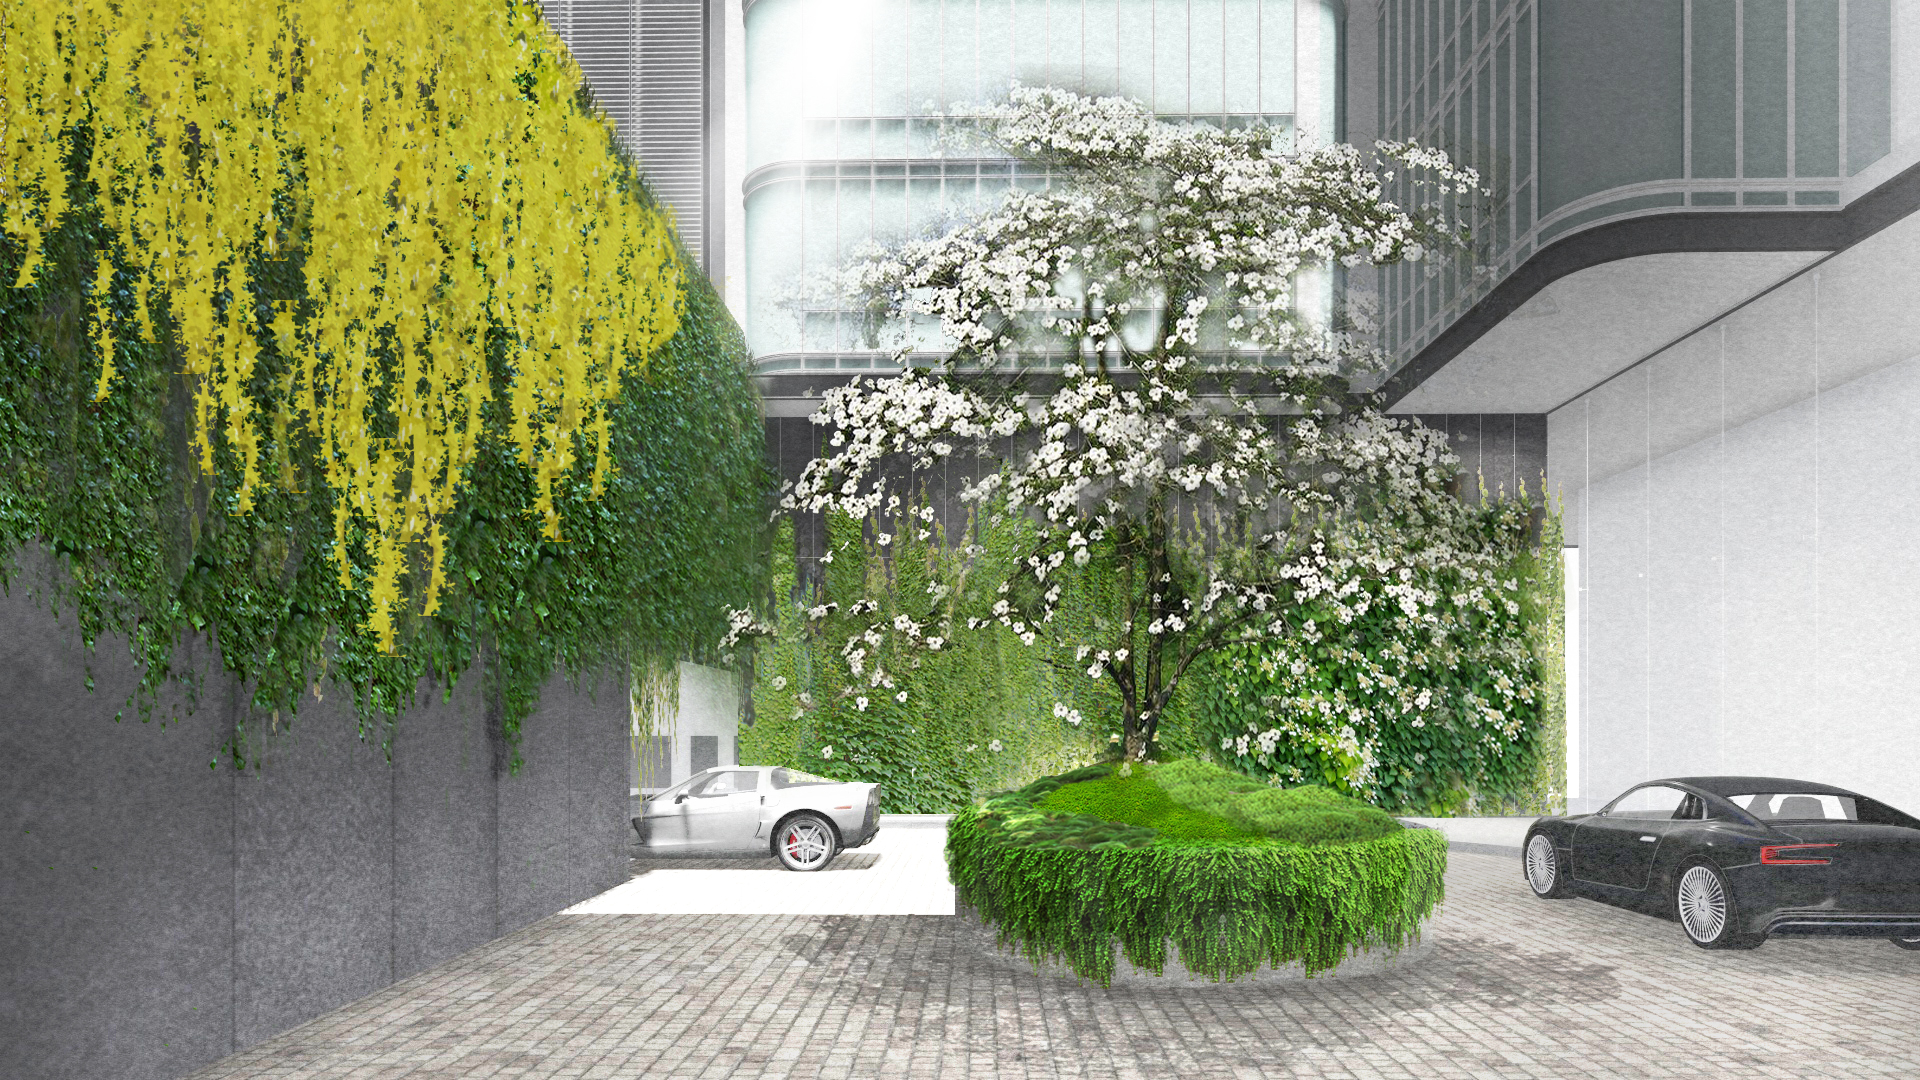 Driveway_updated with forsythia.jpg